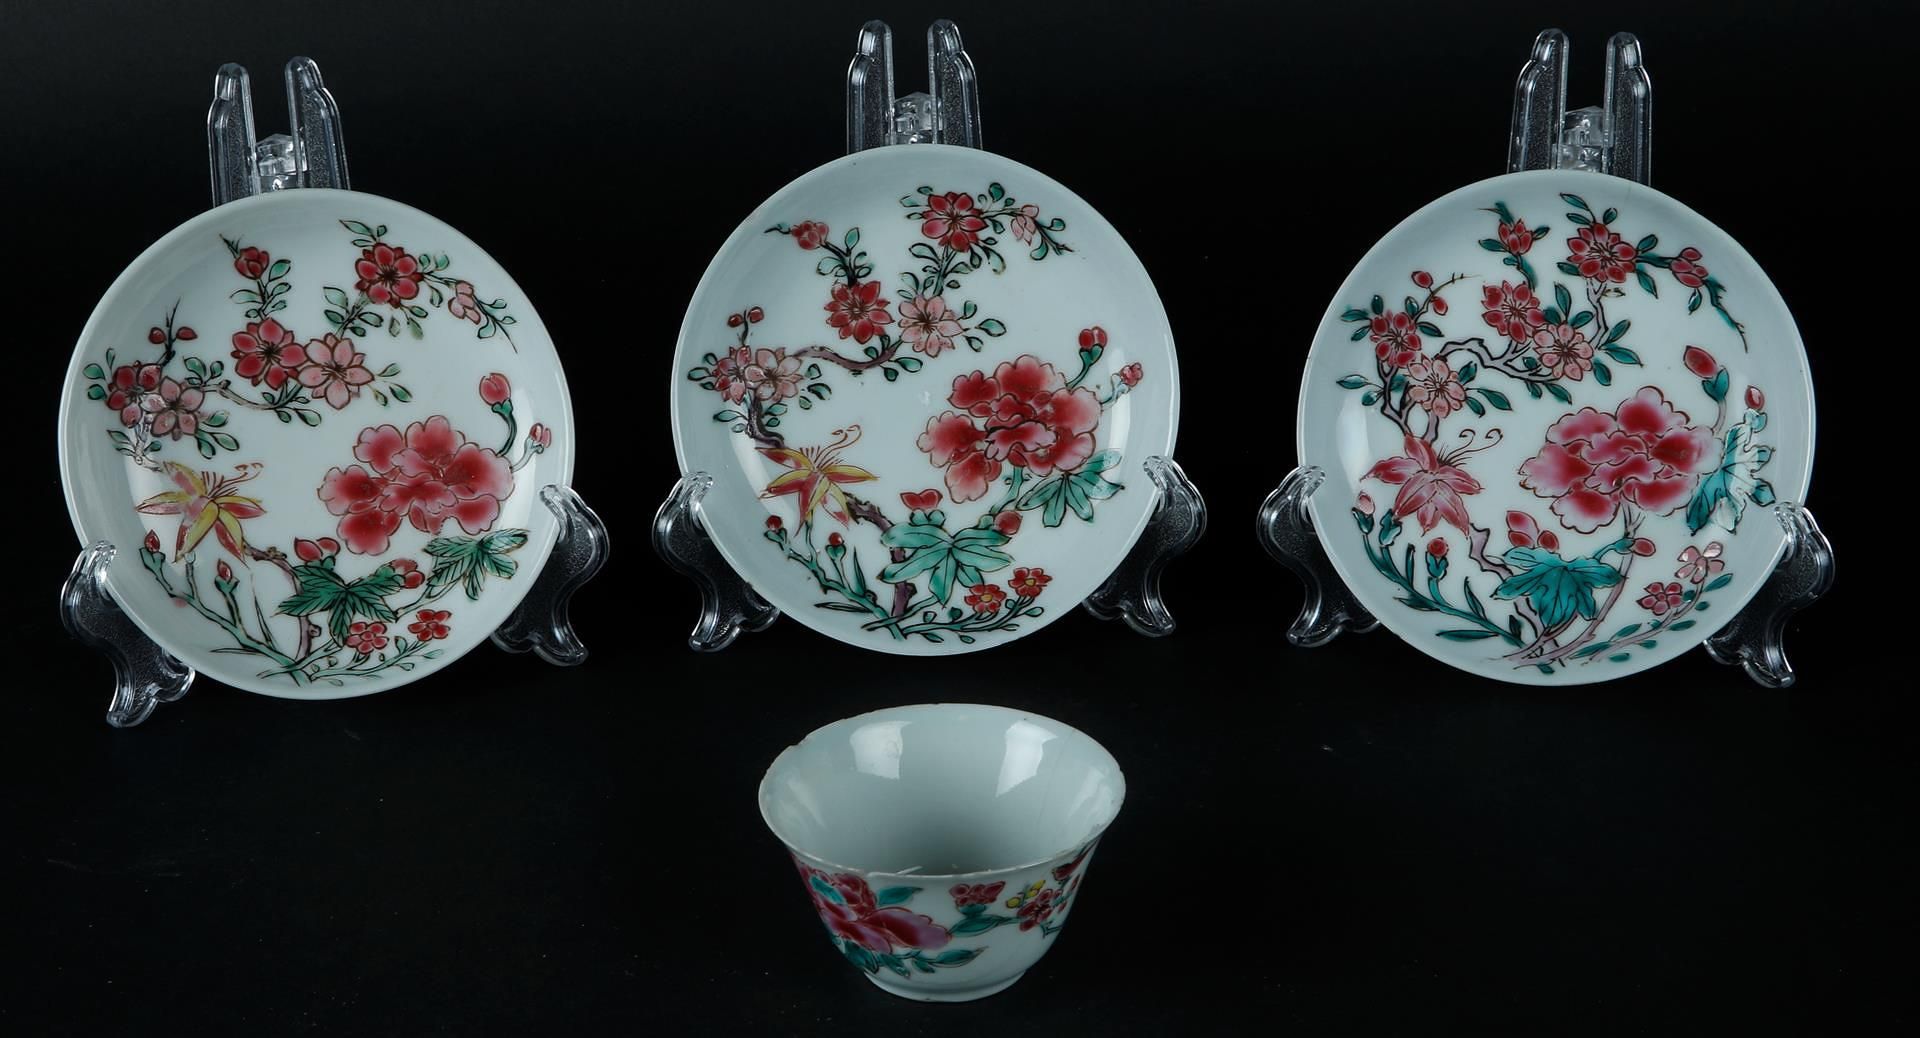 Three porcelain Famille Rose plates and a cup with rich floral decoration. China, Yongzheng.